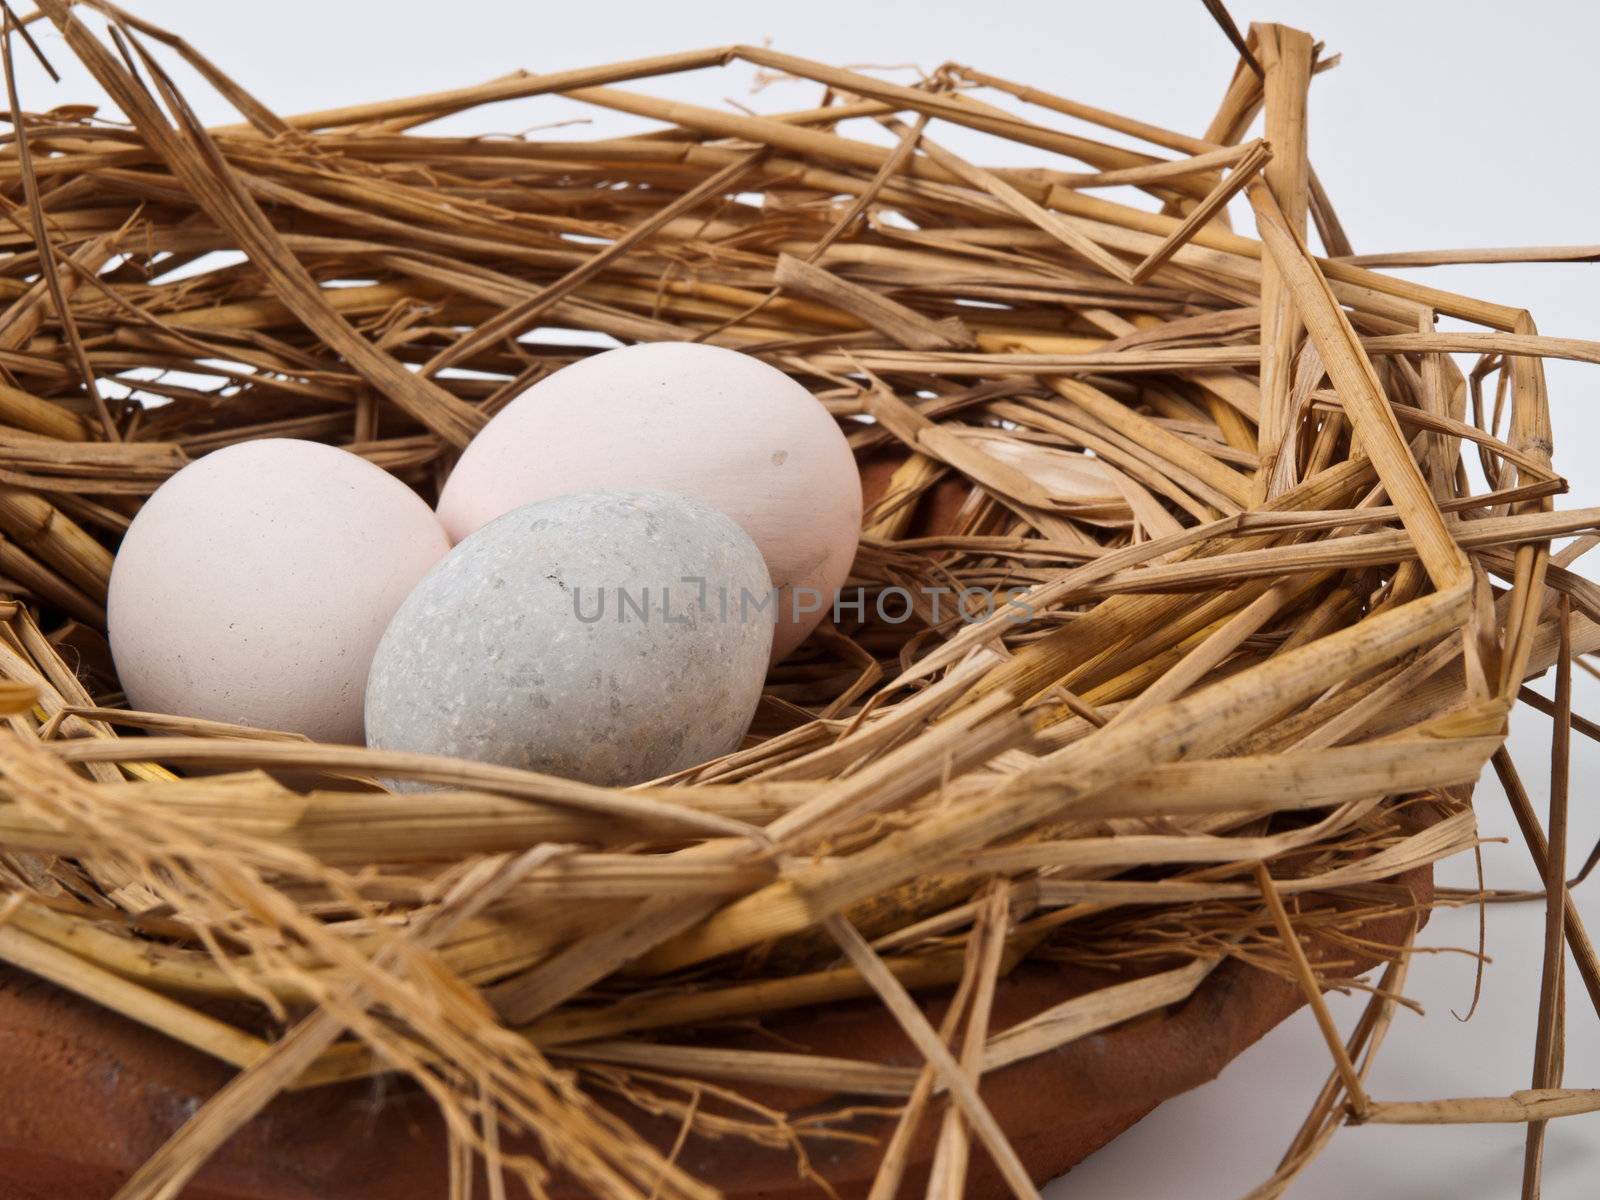 eggs in a nest isolated on a white background